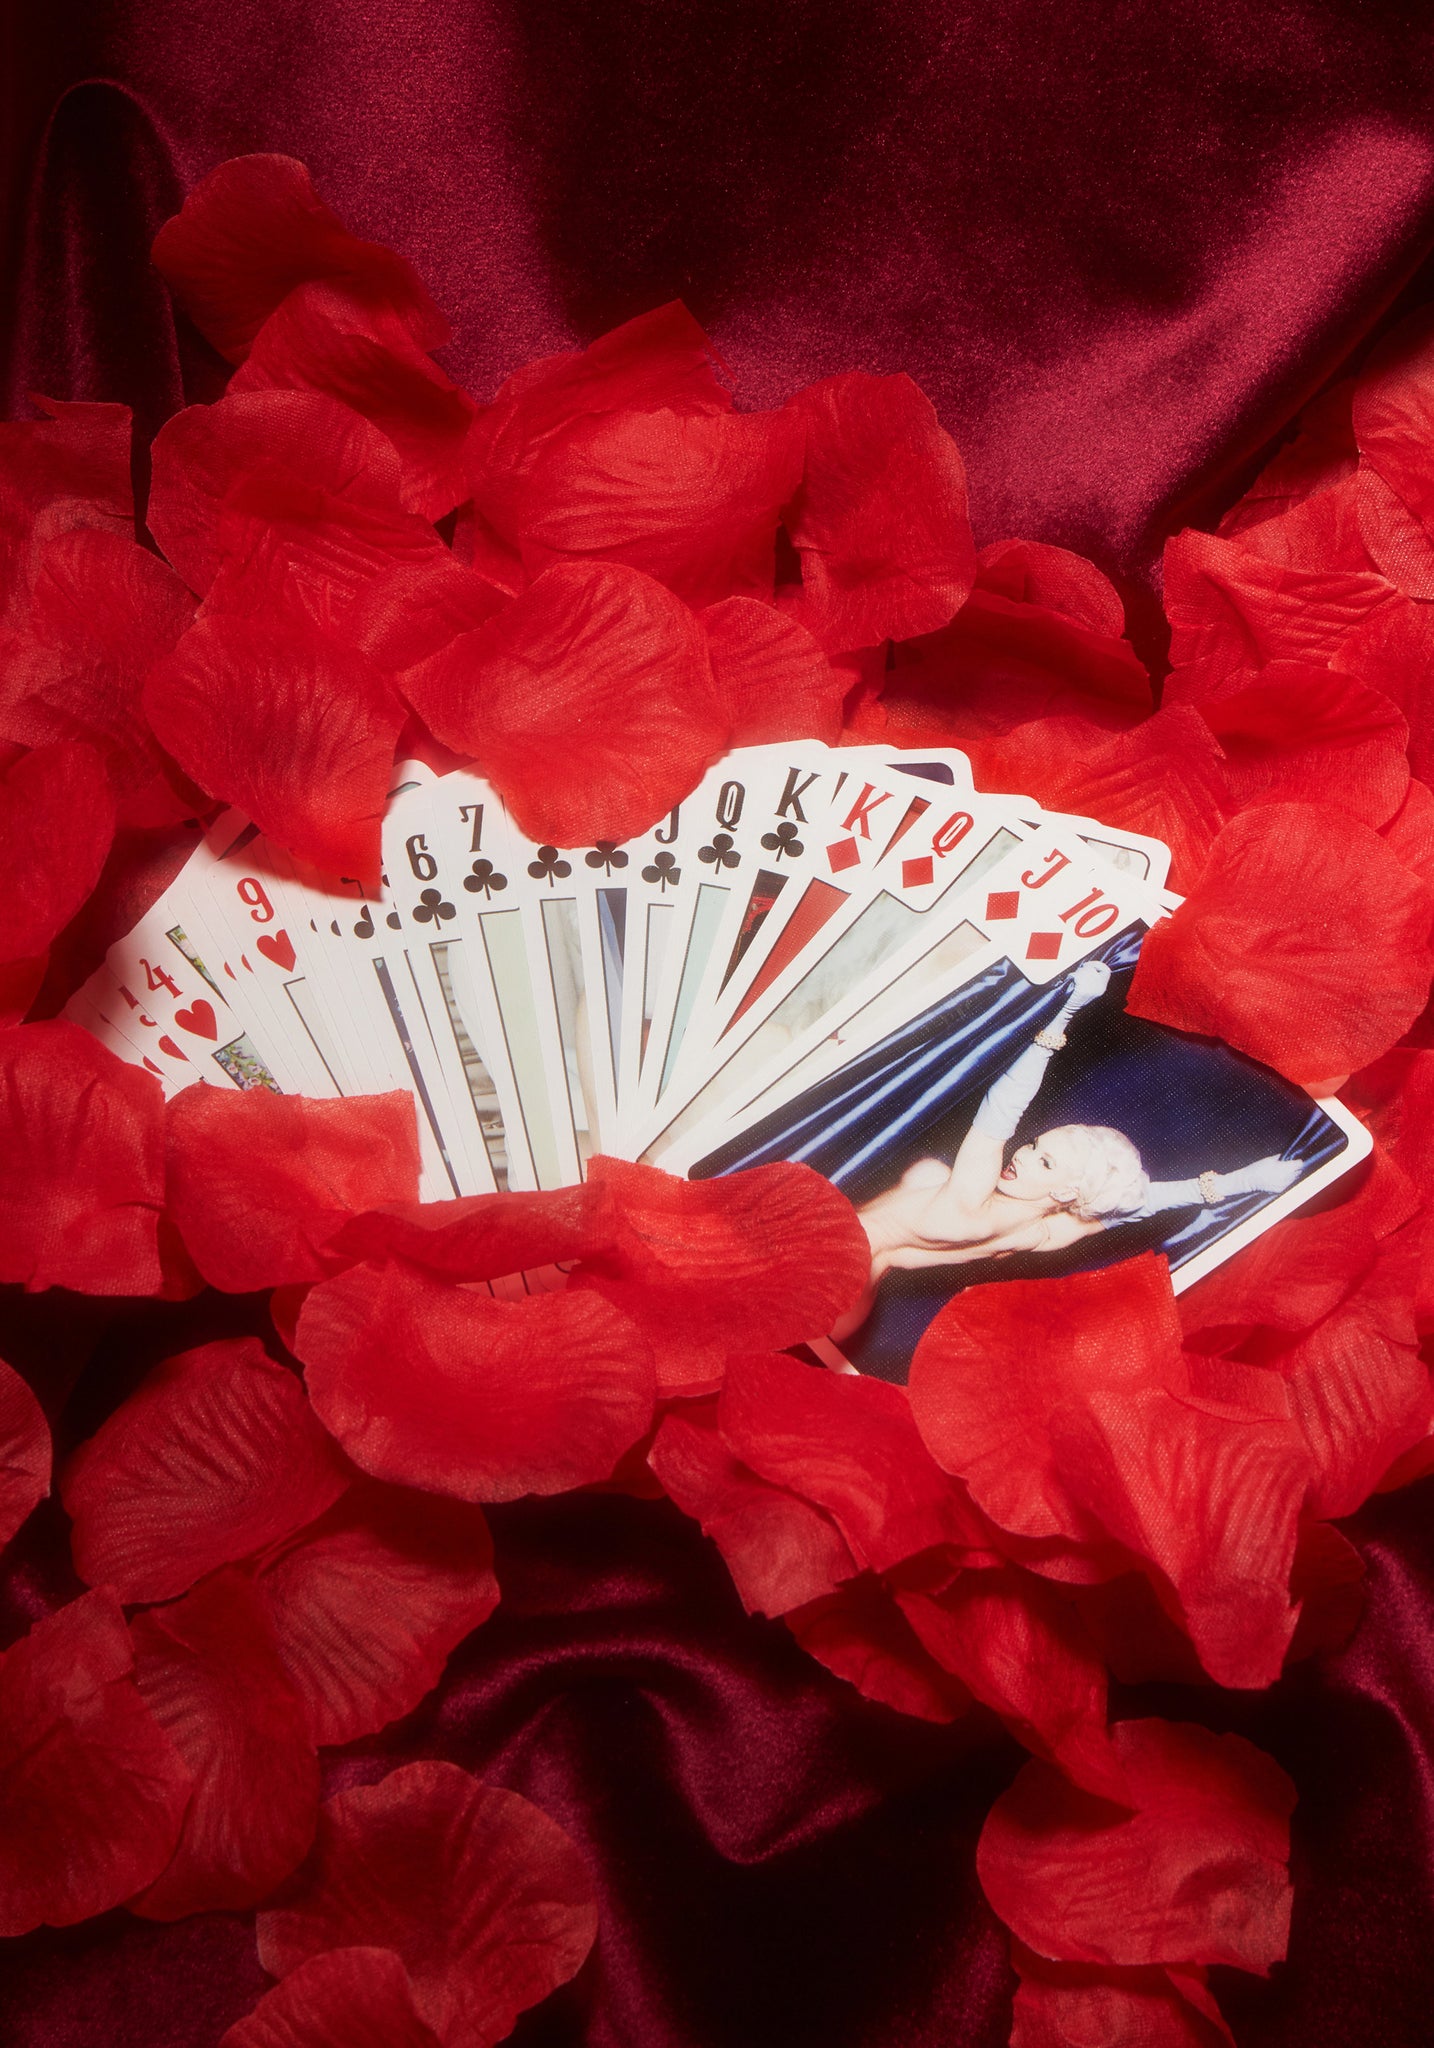 "His & Hers" Gartered Playing Cards